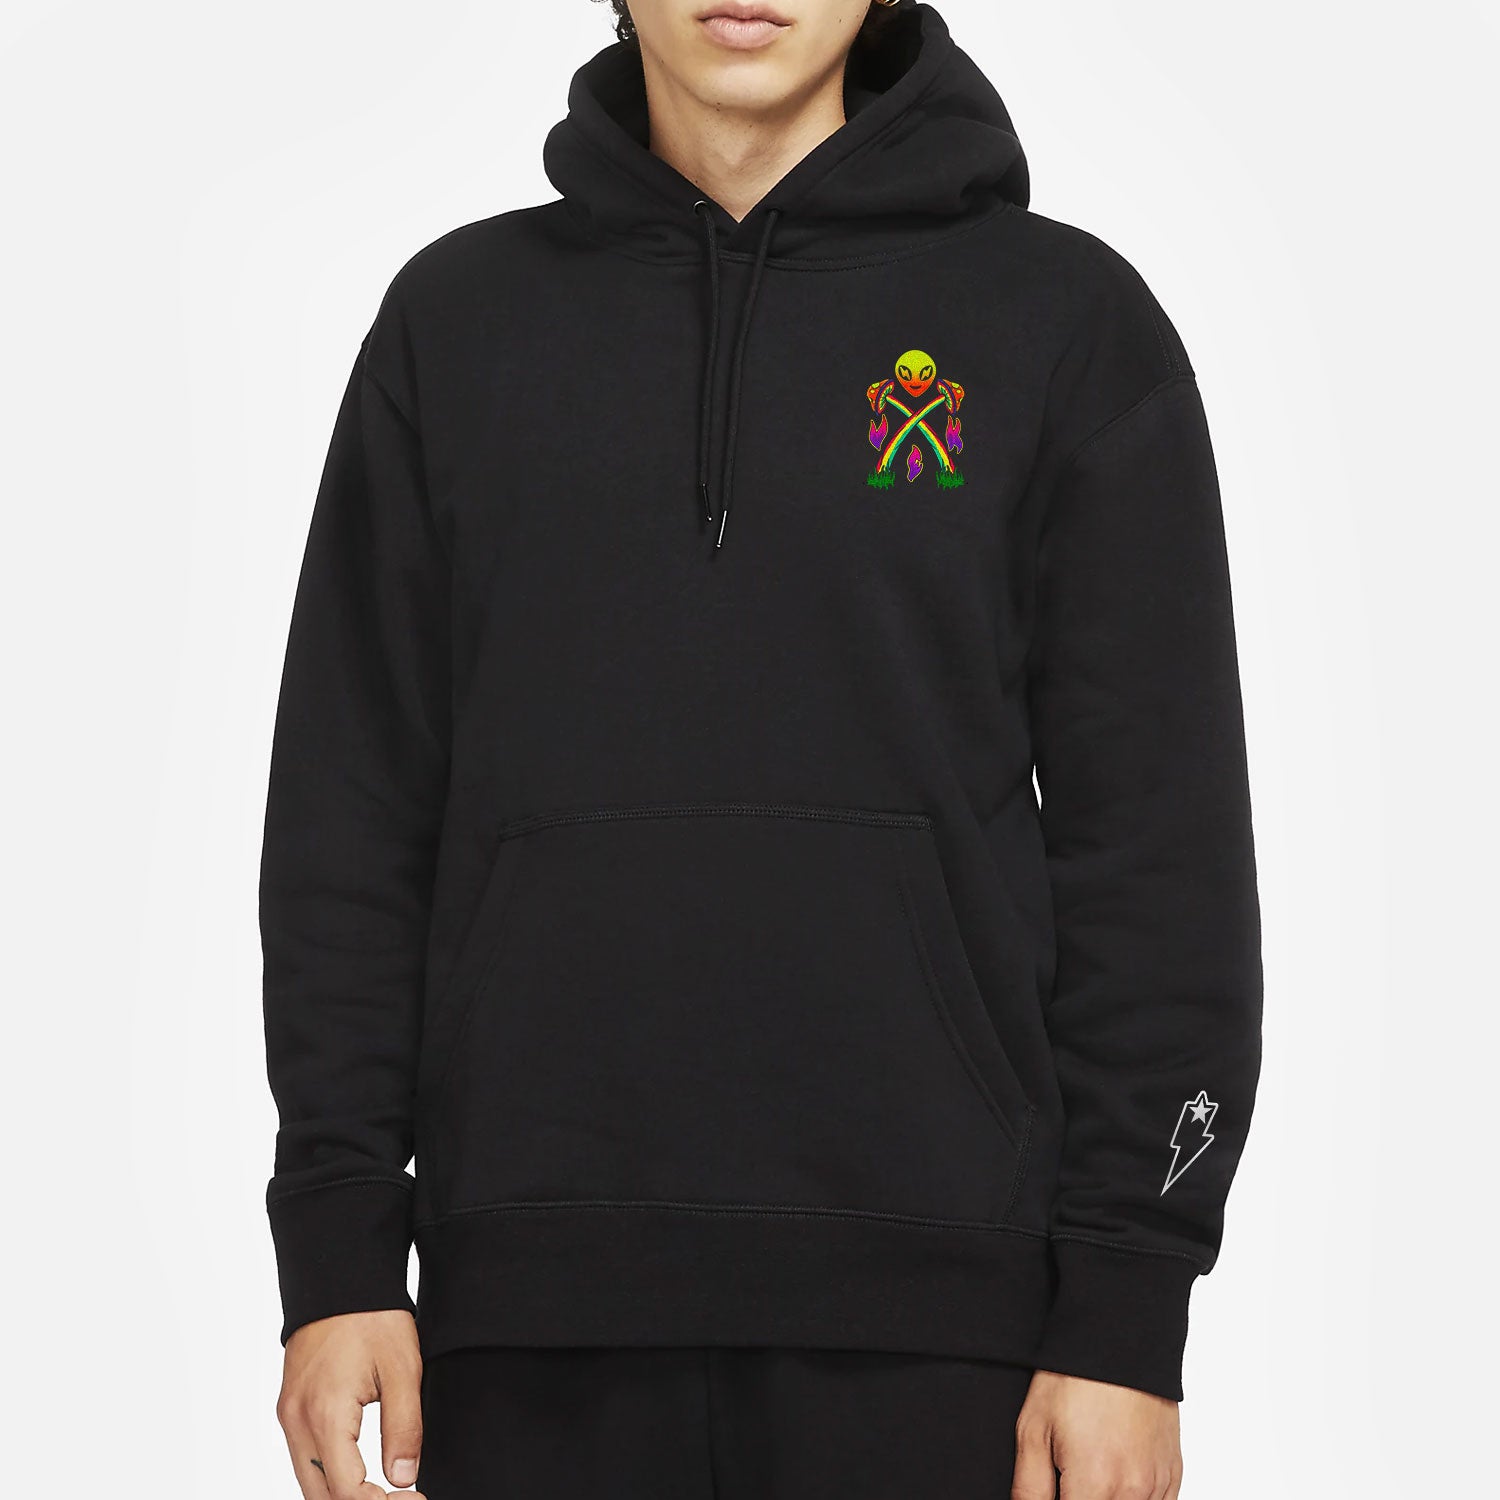 Area 51 Pullover Hoodie